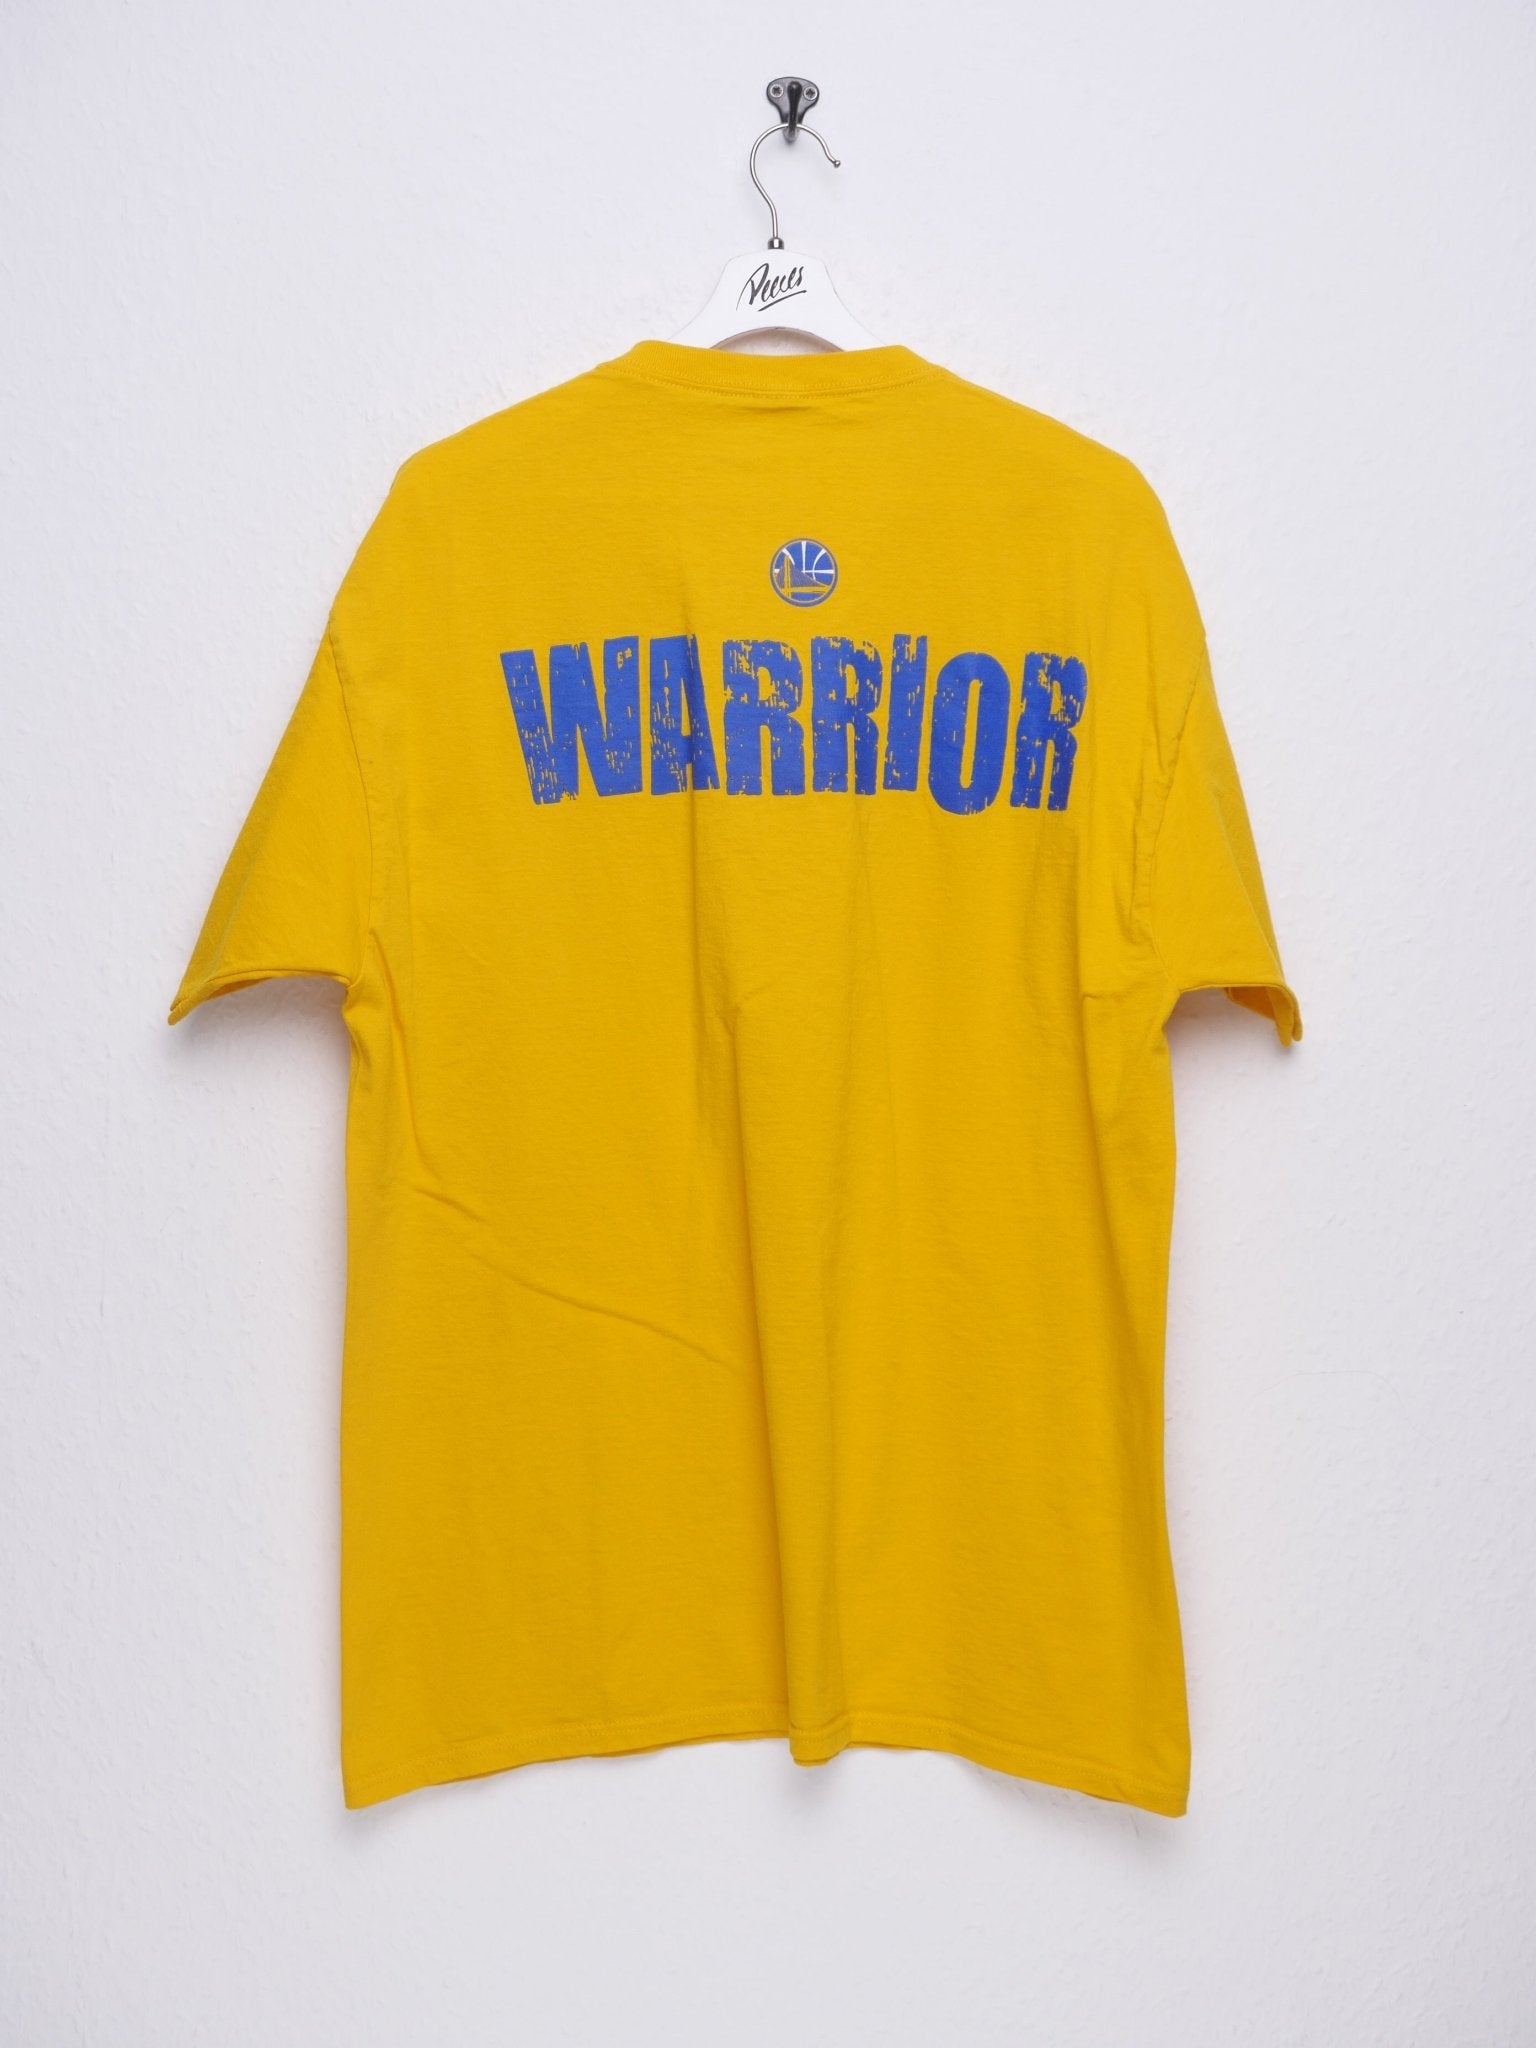 Golden State Warriors printed Graphic Vintage Shirt - Peeces